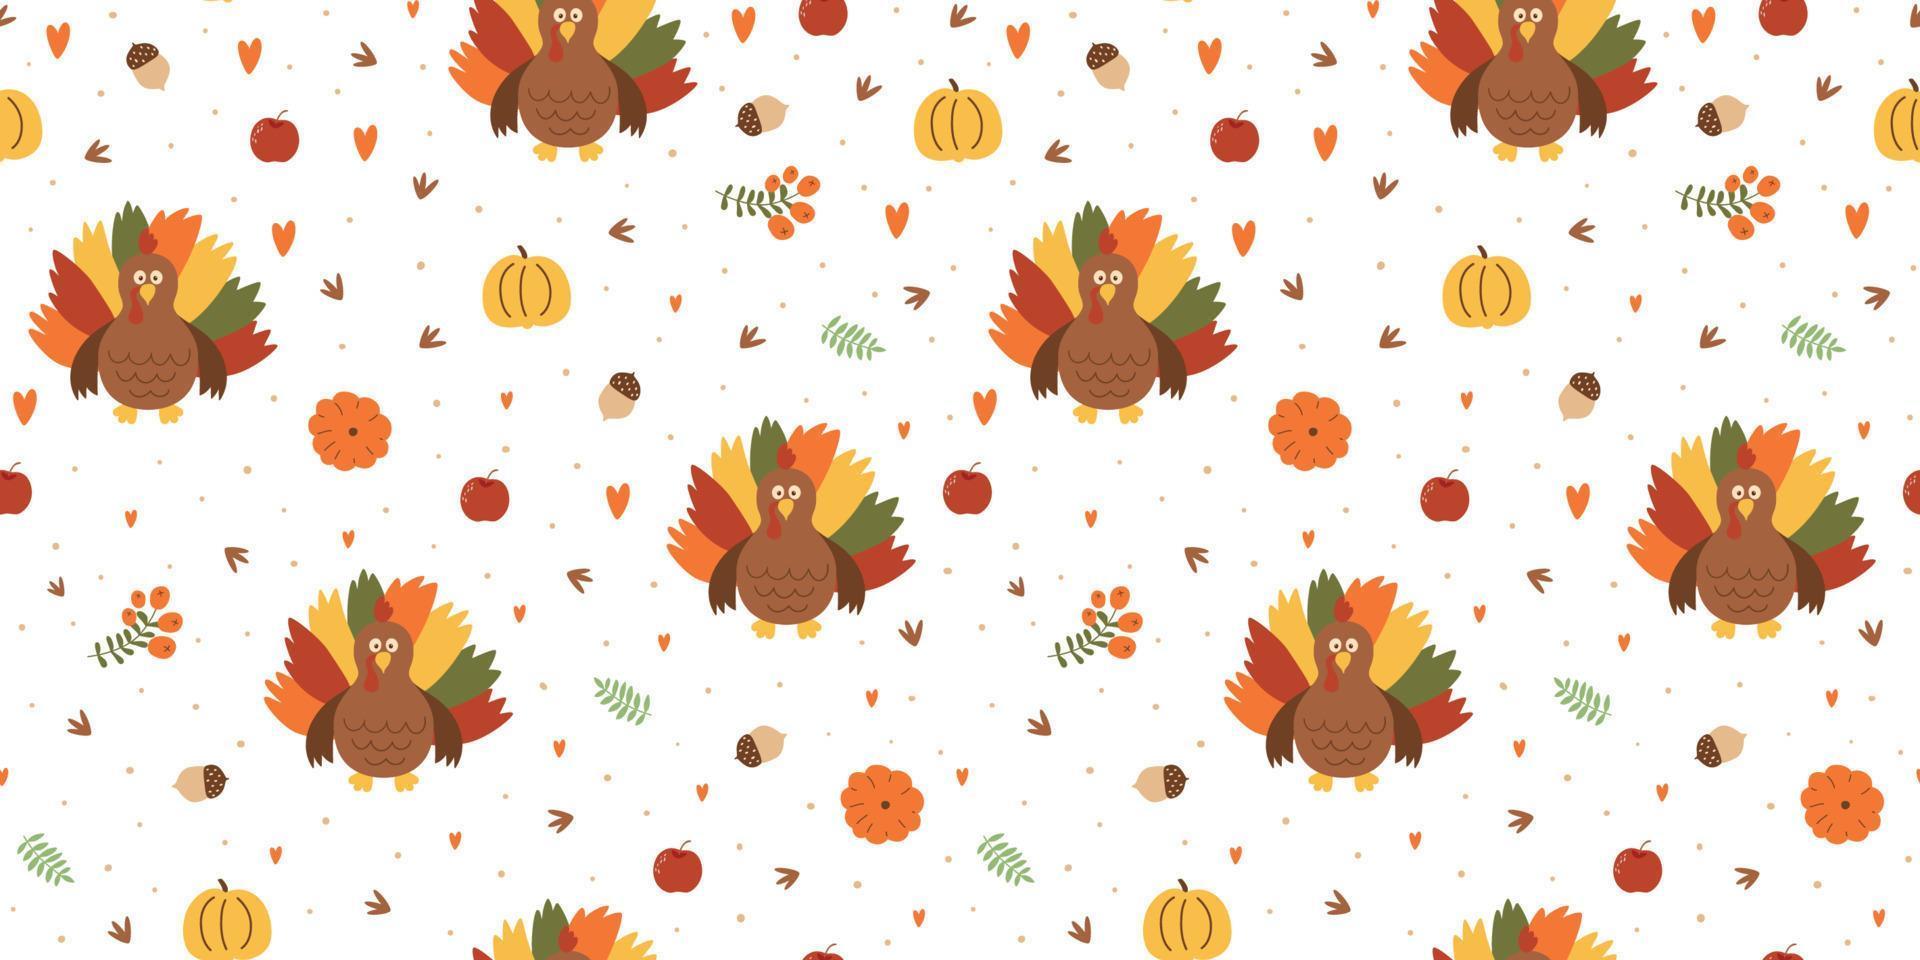 A pattern of turkeys, pumpkins, and leaves on a white background. - Thanksgiving